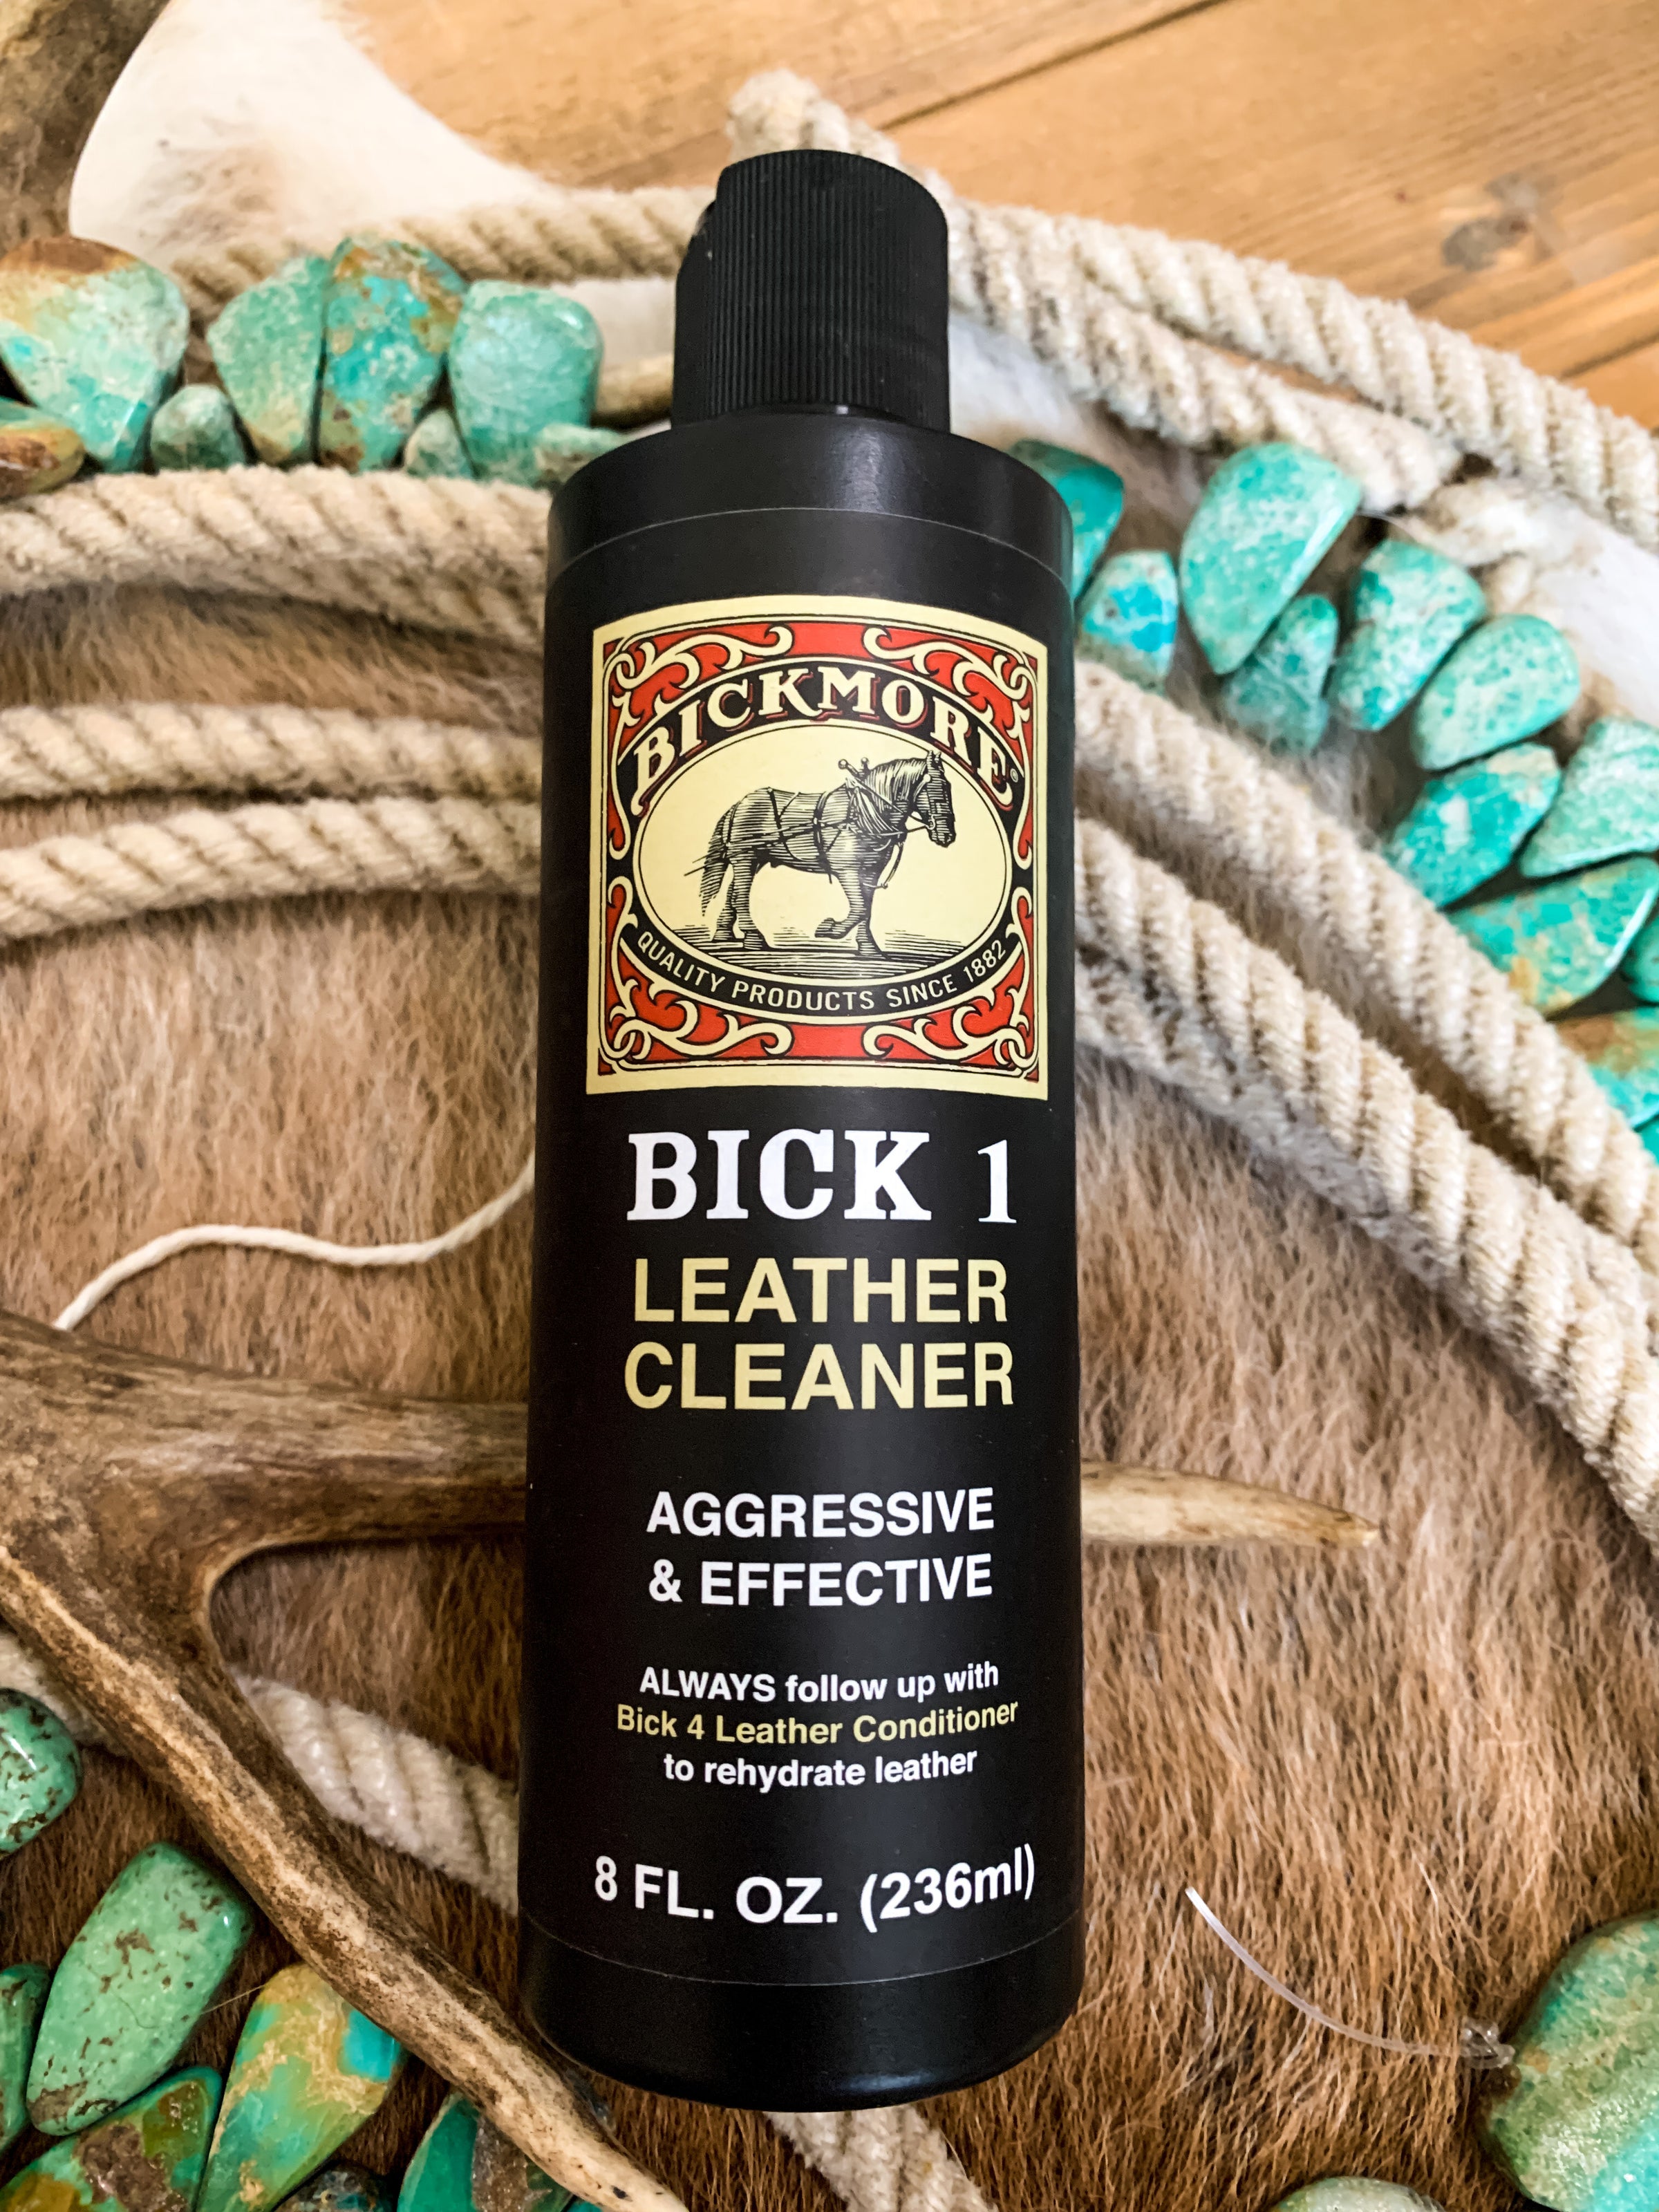 Bickmore Bick 1 Leather Cleaner - 8 oz